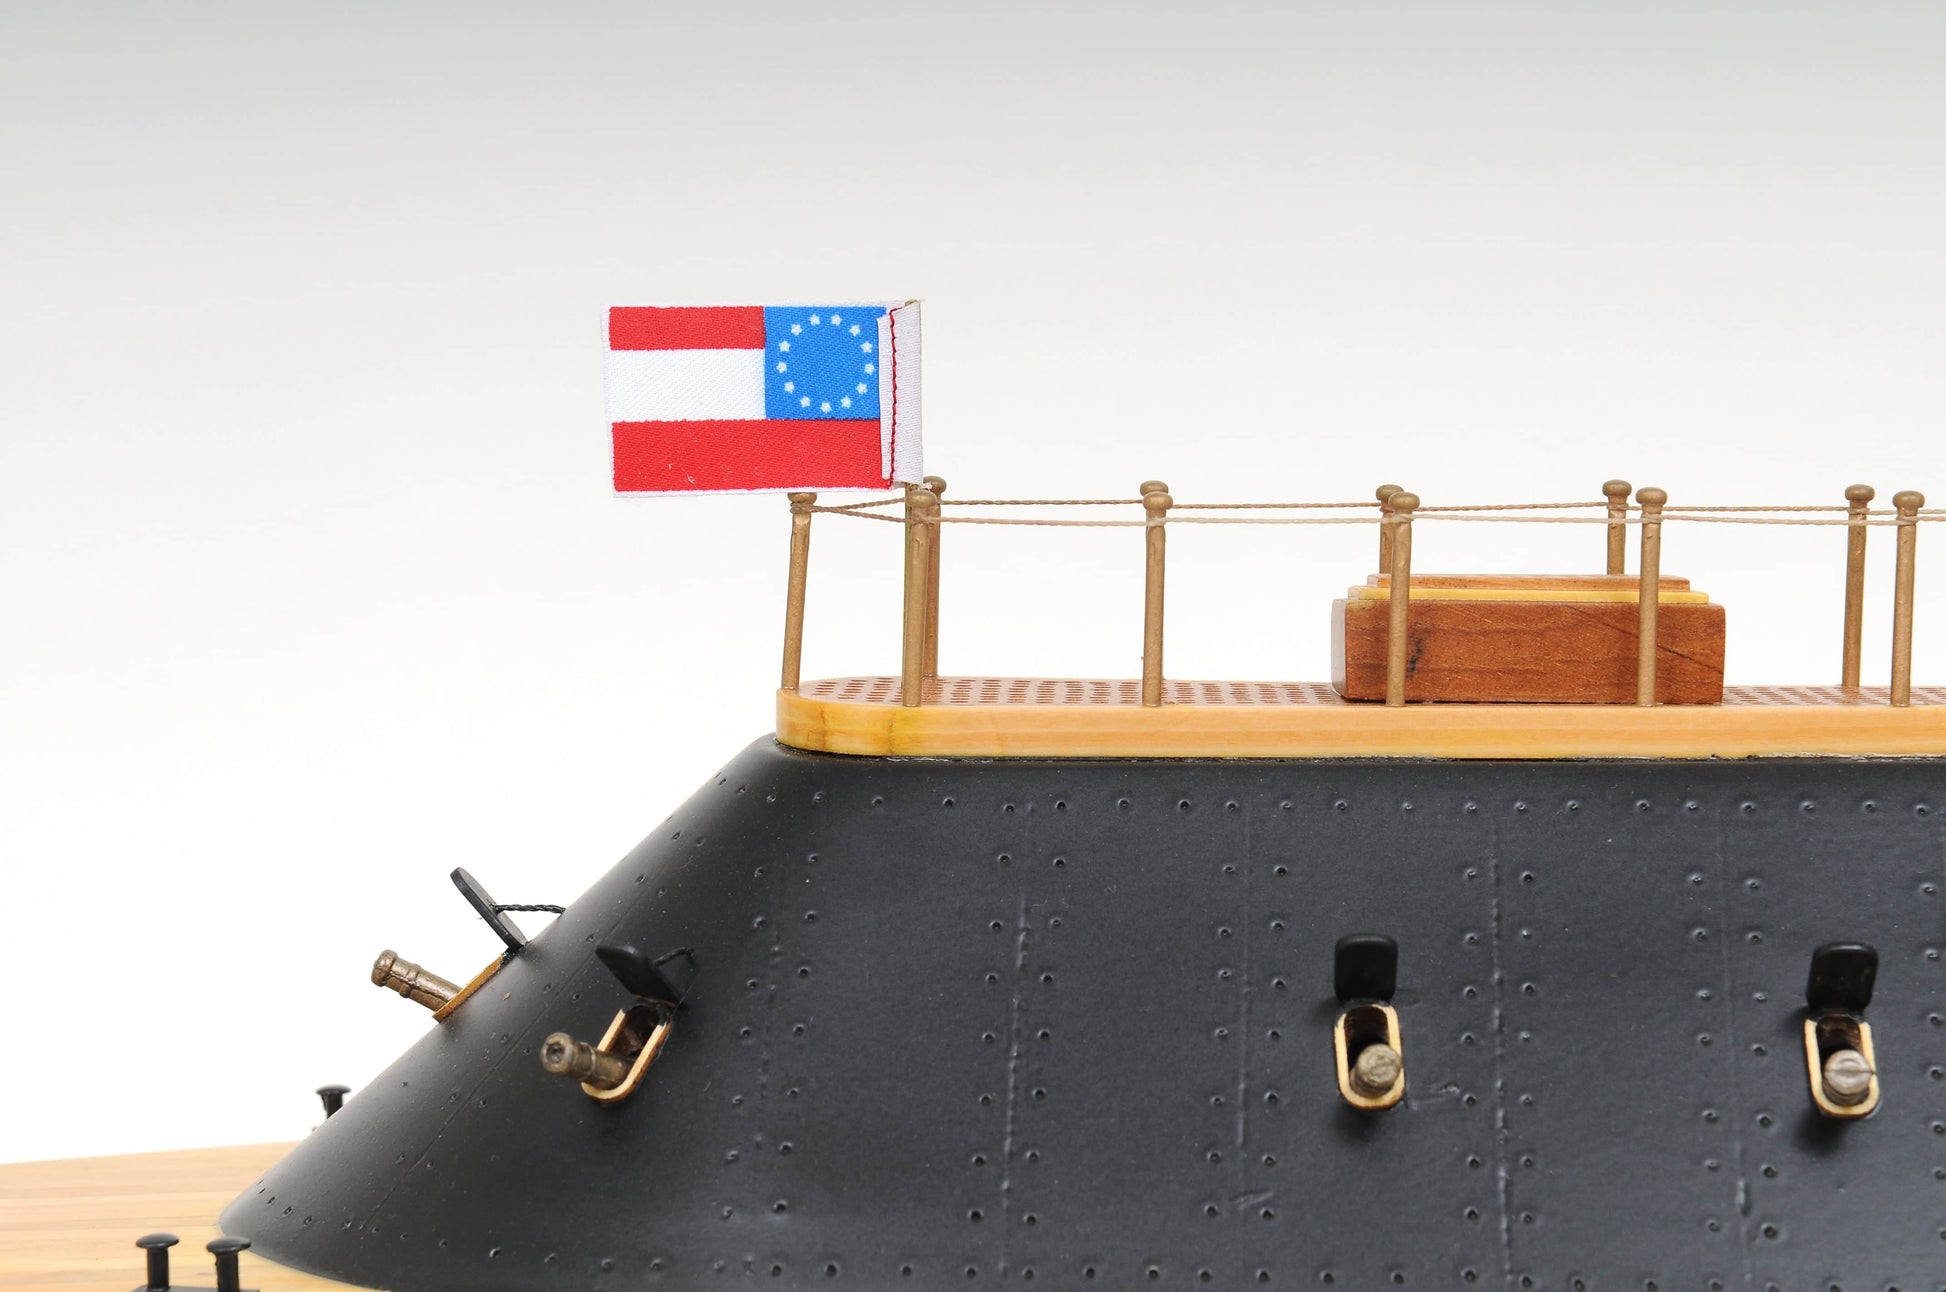 ALDO Hobbies & Creative Arts > Collectibles > Scale Models L: 28 W: 7 H: 9 Inches / NEW / wood C.S.S. Virginia Ironclad Steam Powered Ship Exclusive Edition Wood Model Assembled